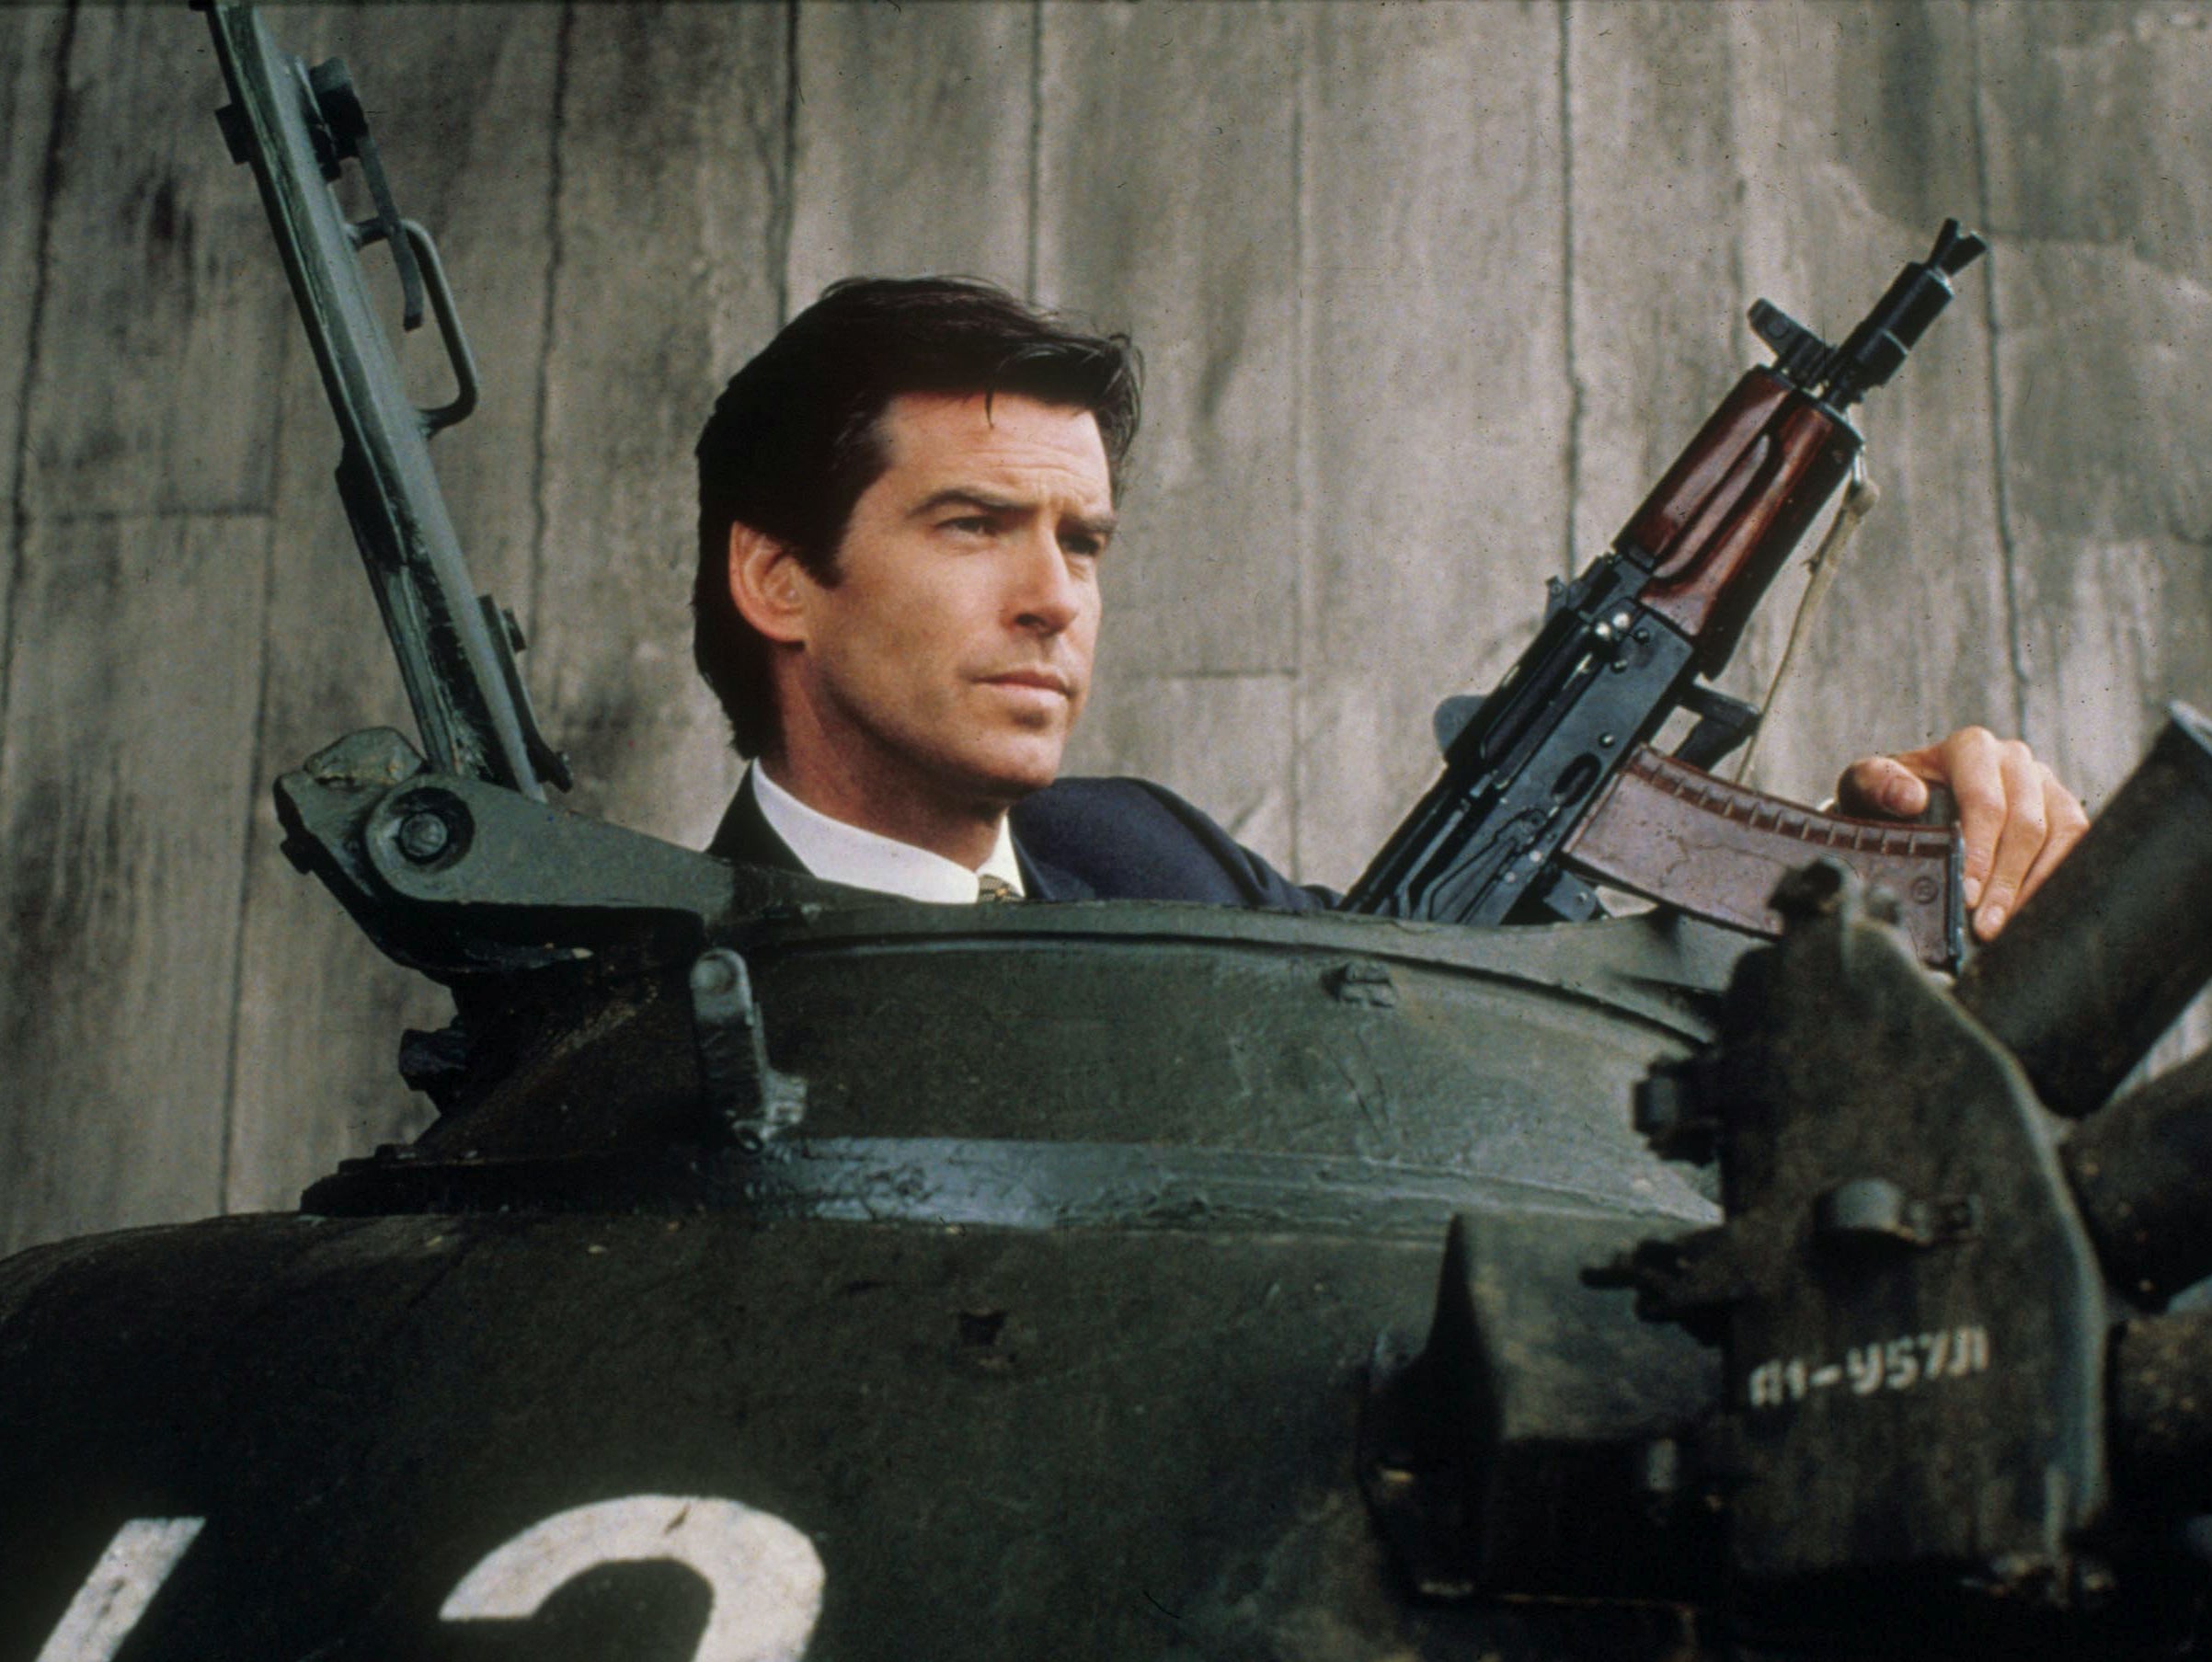 ‘GoldenEye’ influenced a video game that ‘broke the mould’ by allowing players to run free in the world of James Bond